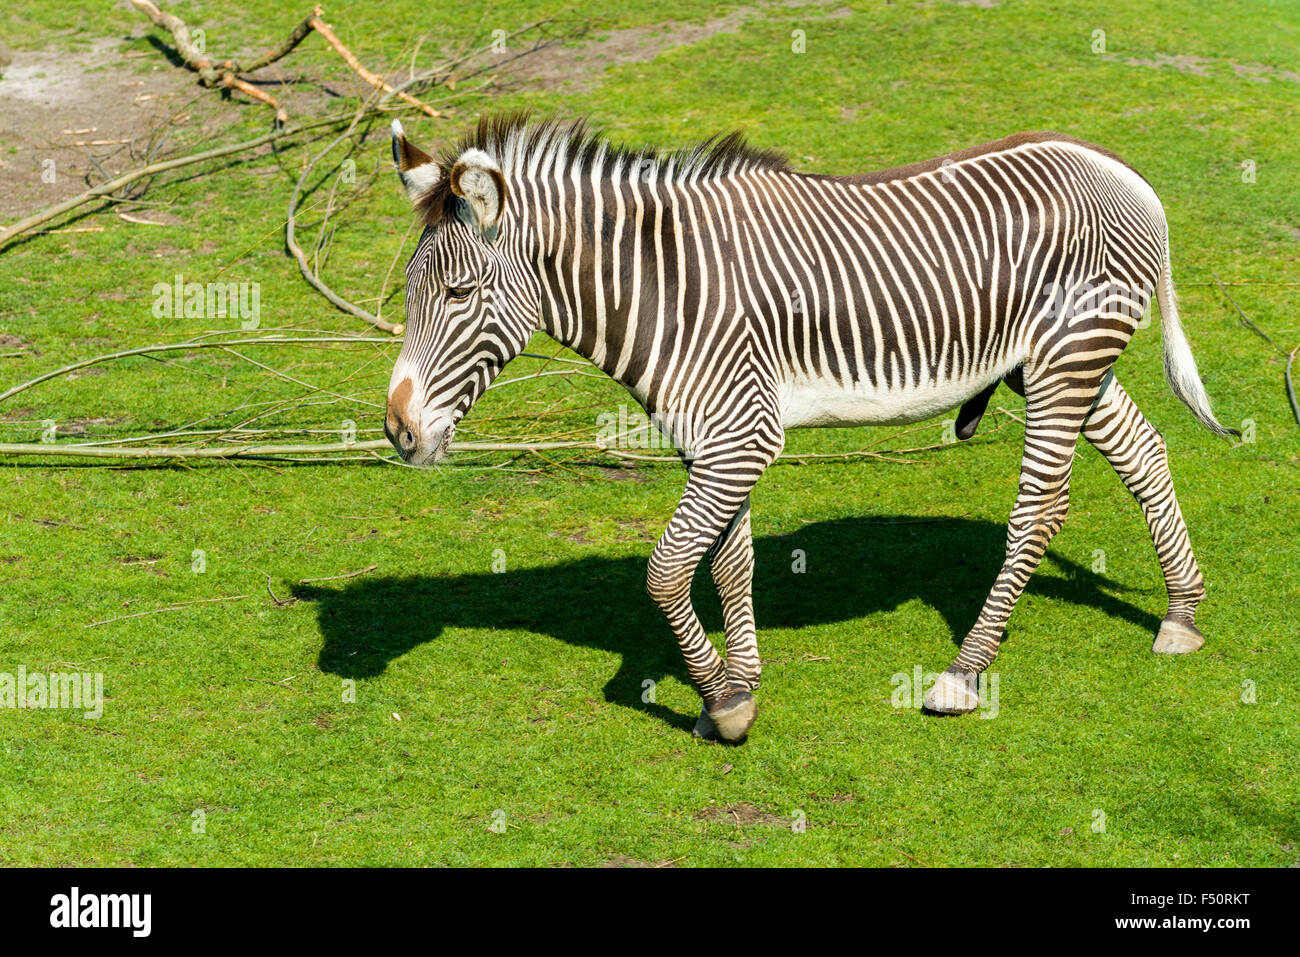 A Grevy's Zebra (Equus grevyi), walking on a meadow Stock Photo